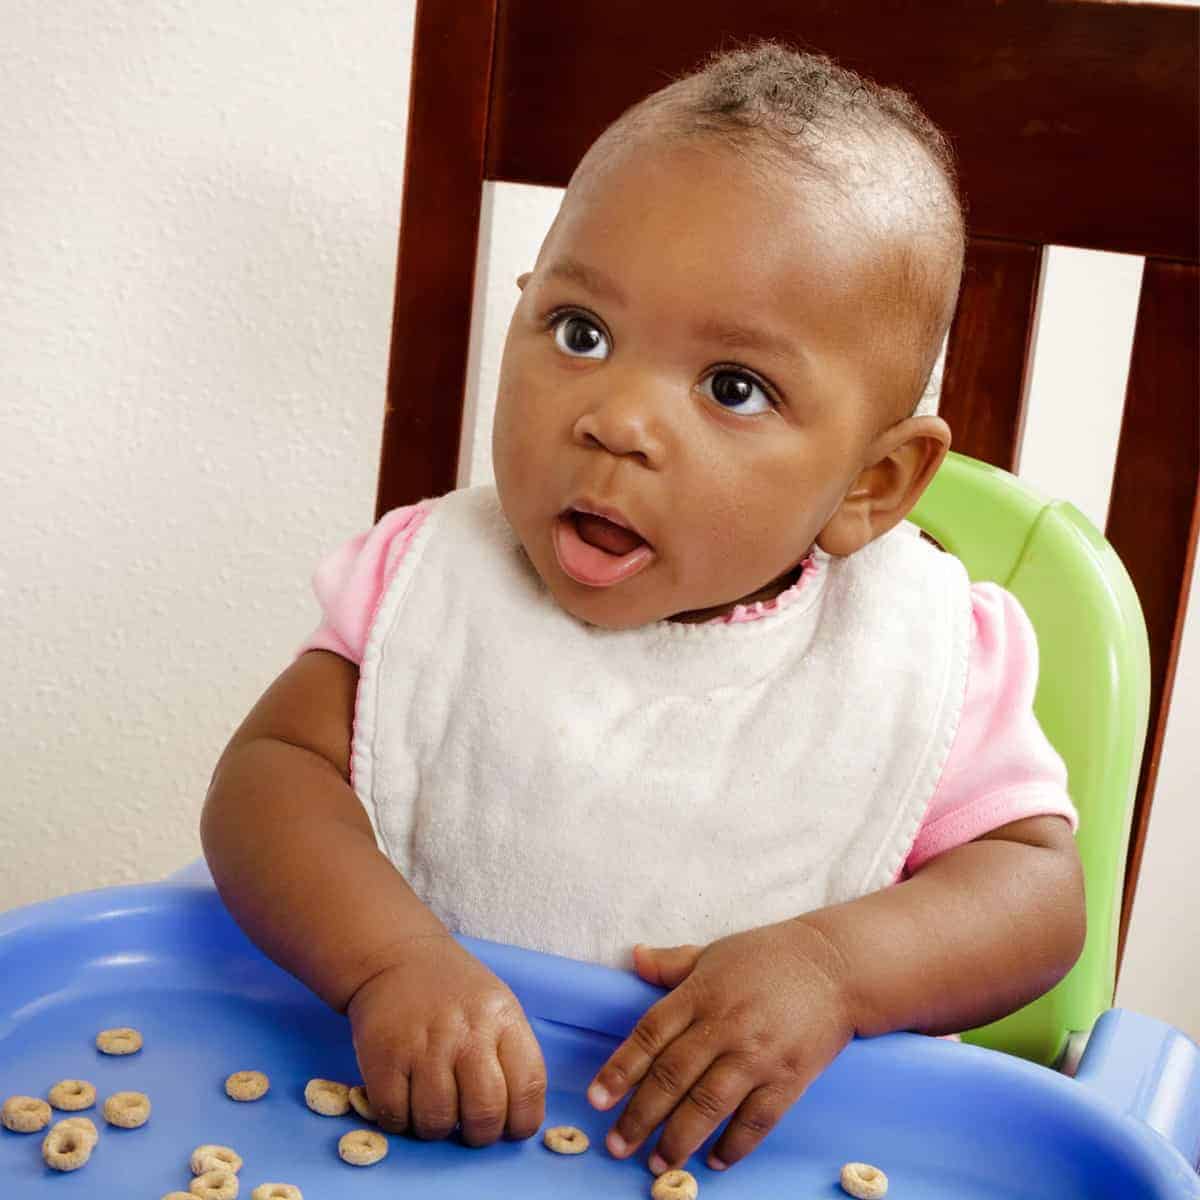 Parents are often wondering, “When can babies eat cheerios?” Or, puffs, toast, cheese, watermelon, and banana. Learn when so you can feed your baby safely! 